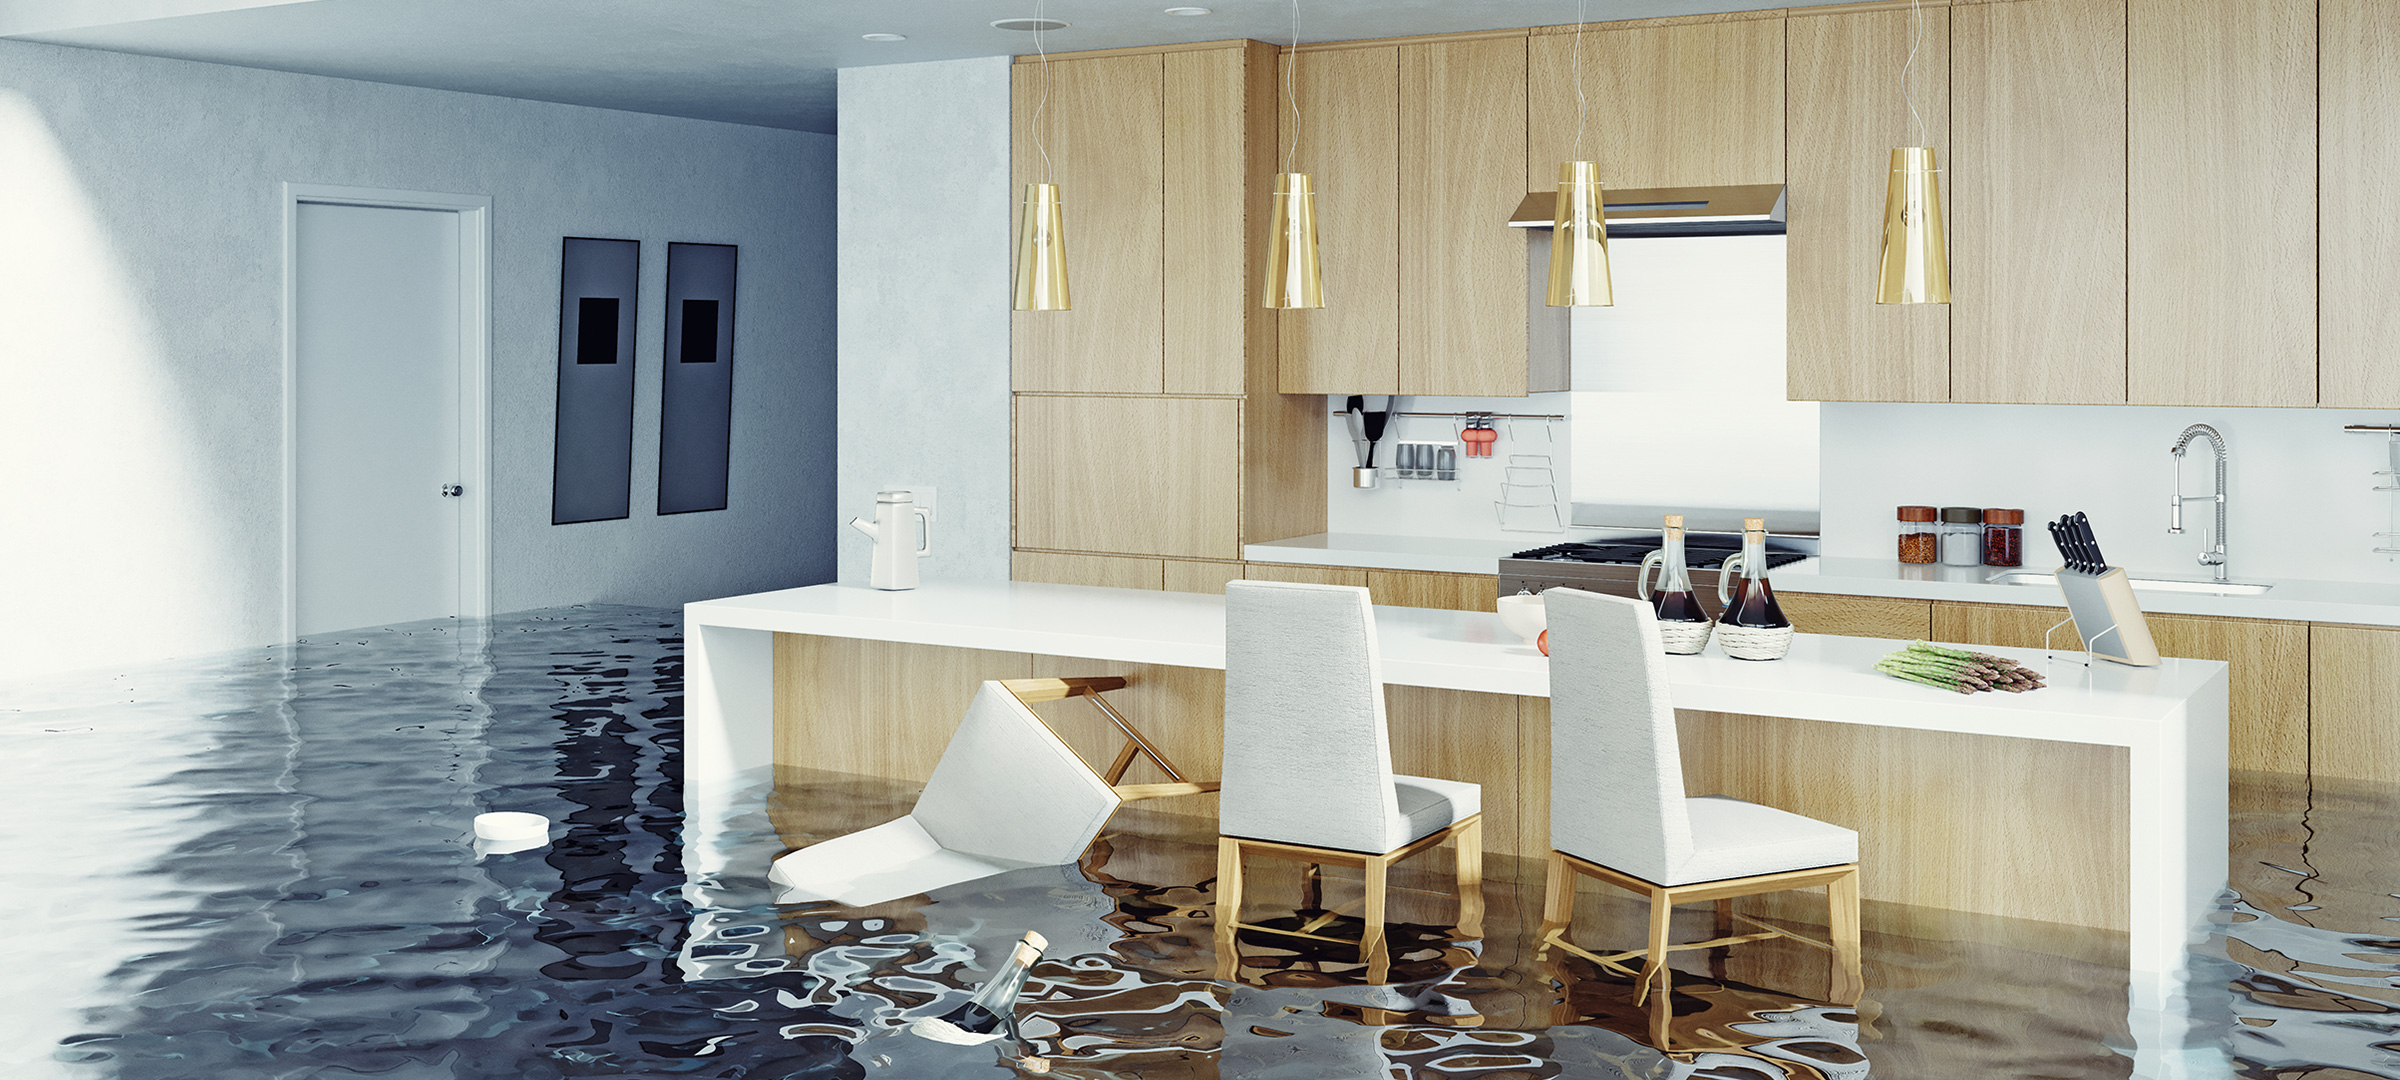 Water Damage Restoration and Remediation Services